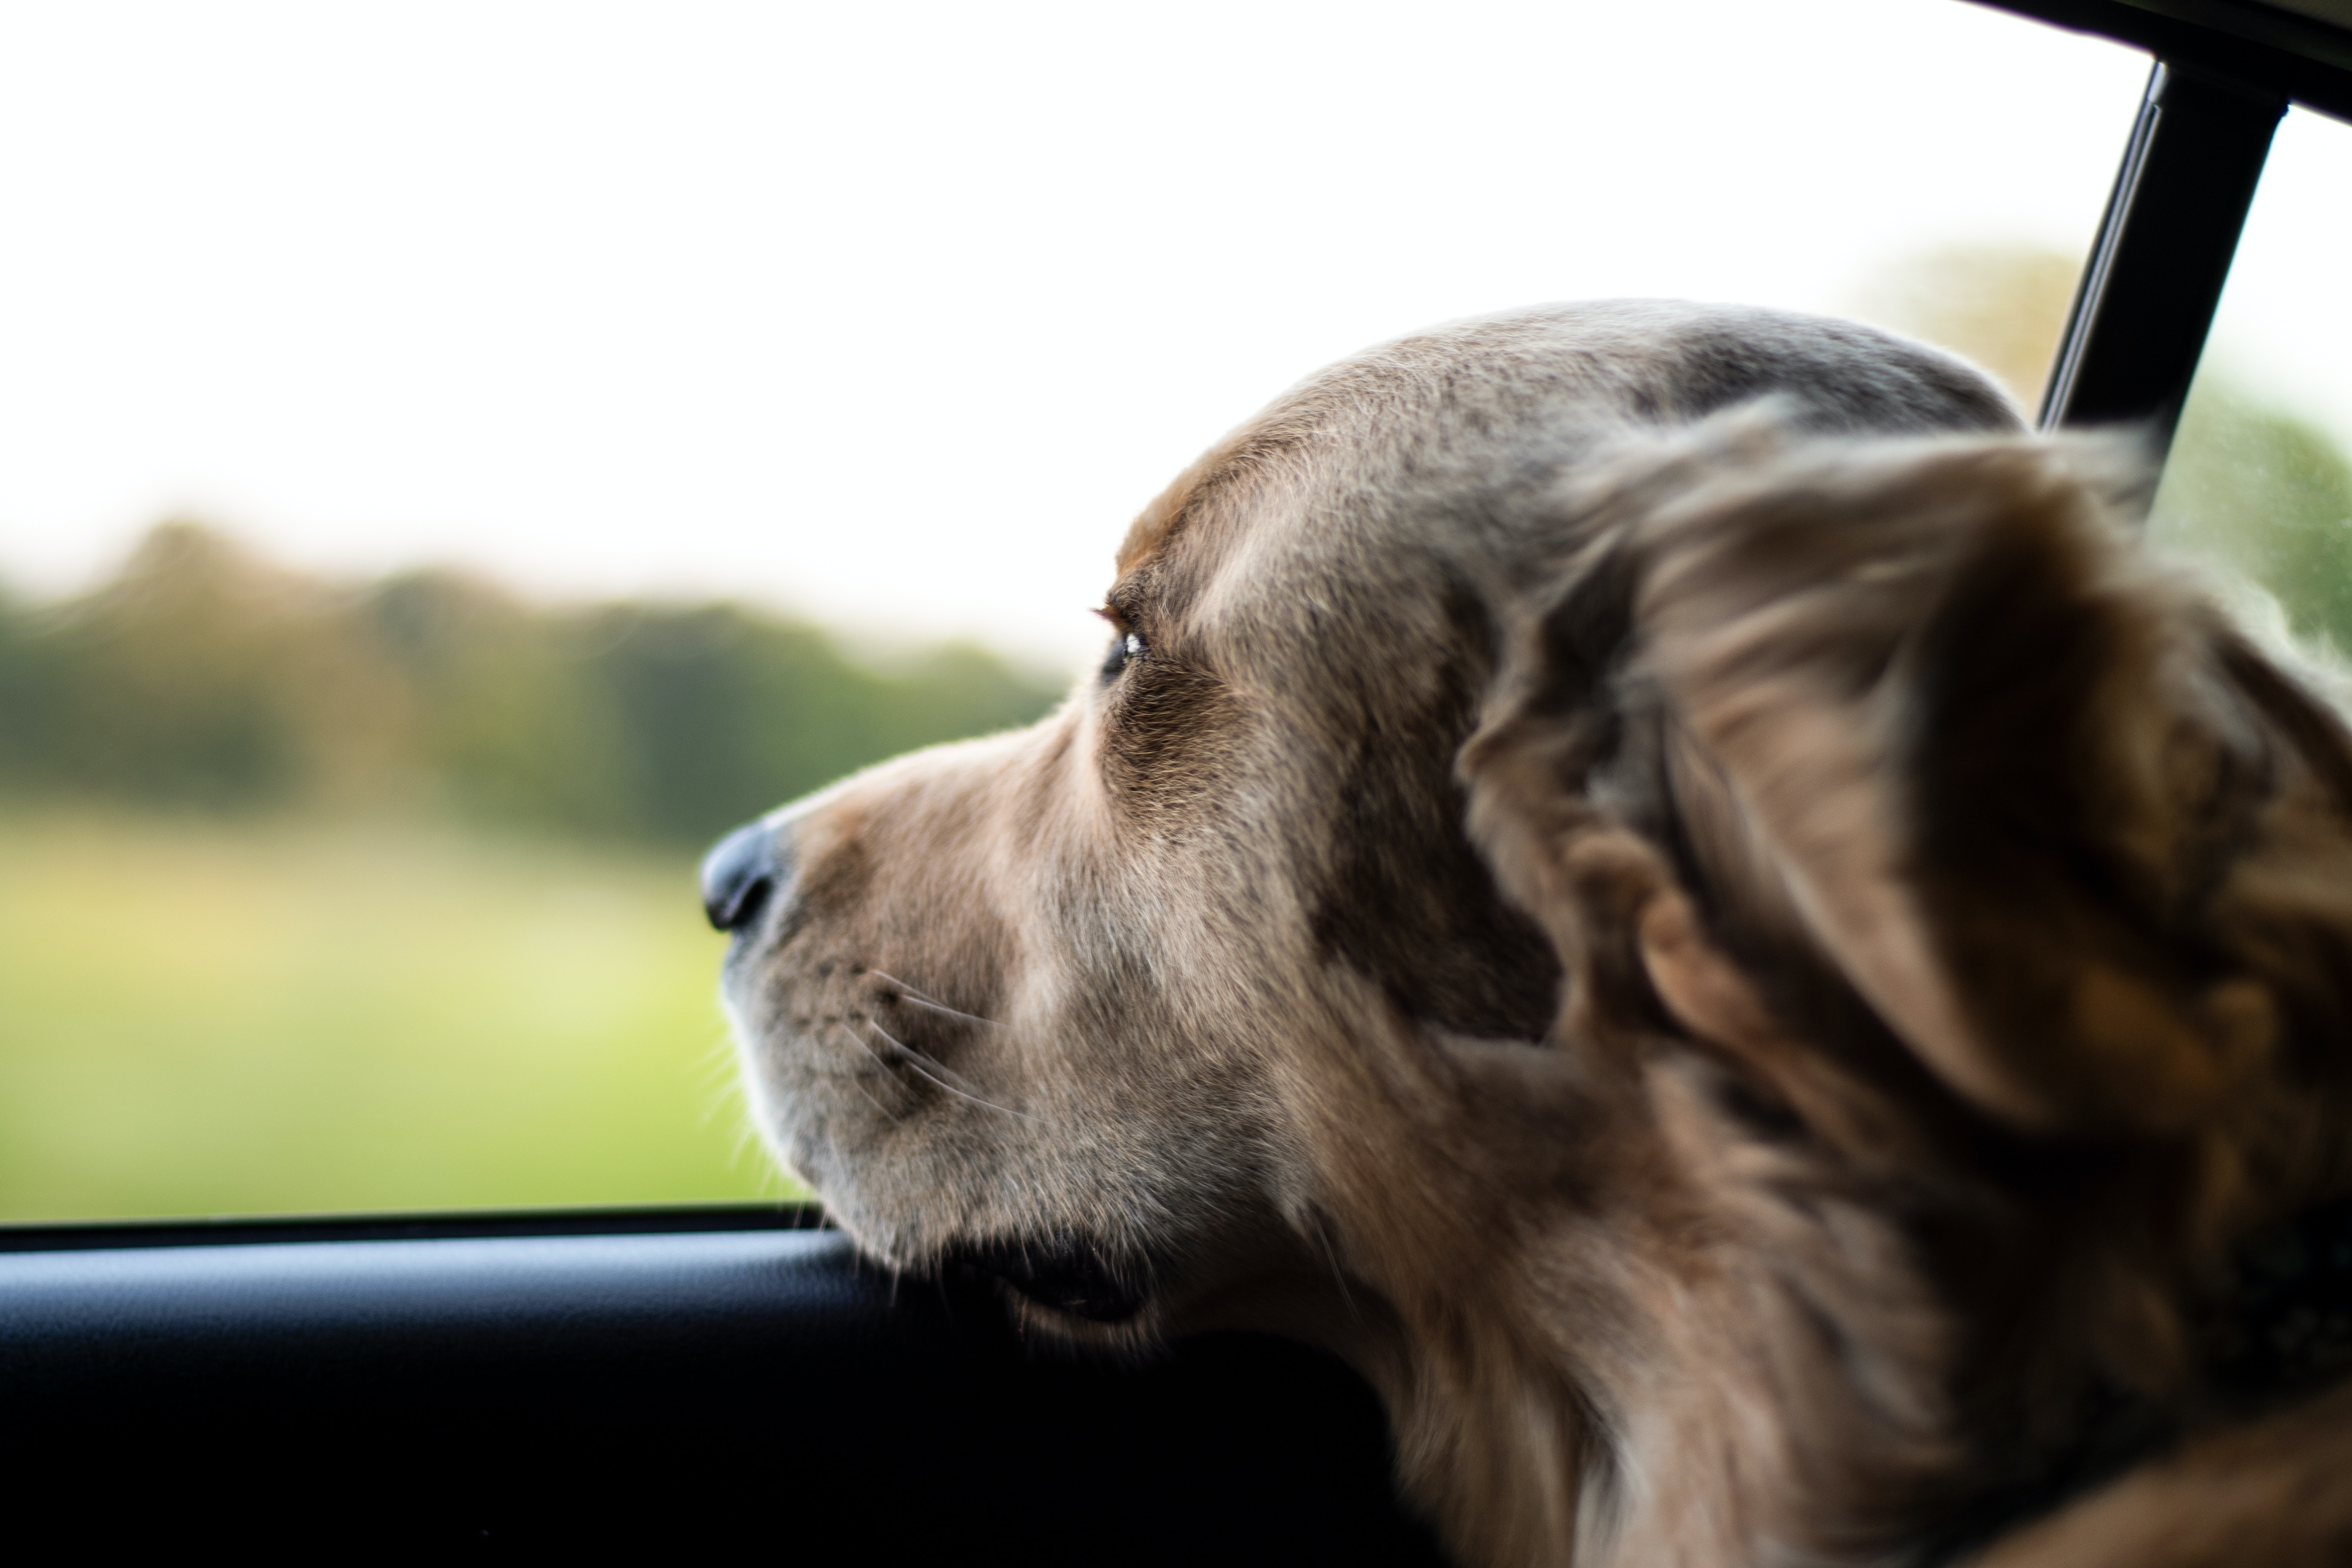 Golden retriever dog in back seat of car looking out of window